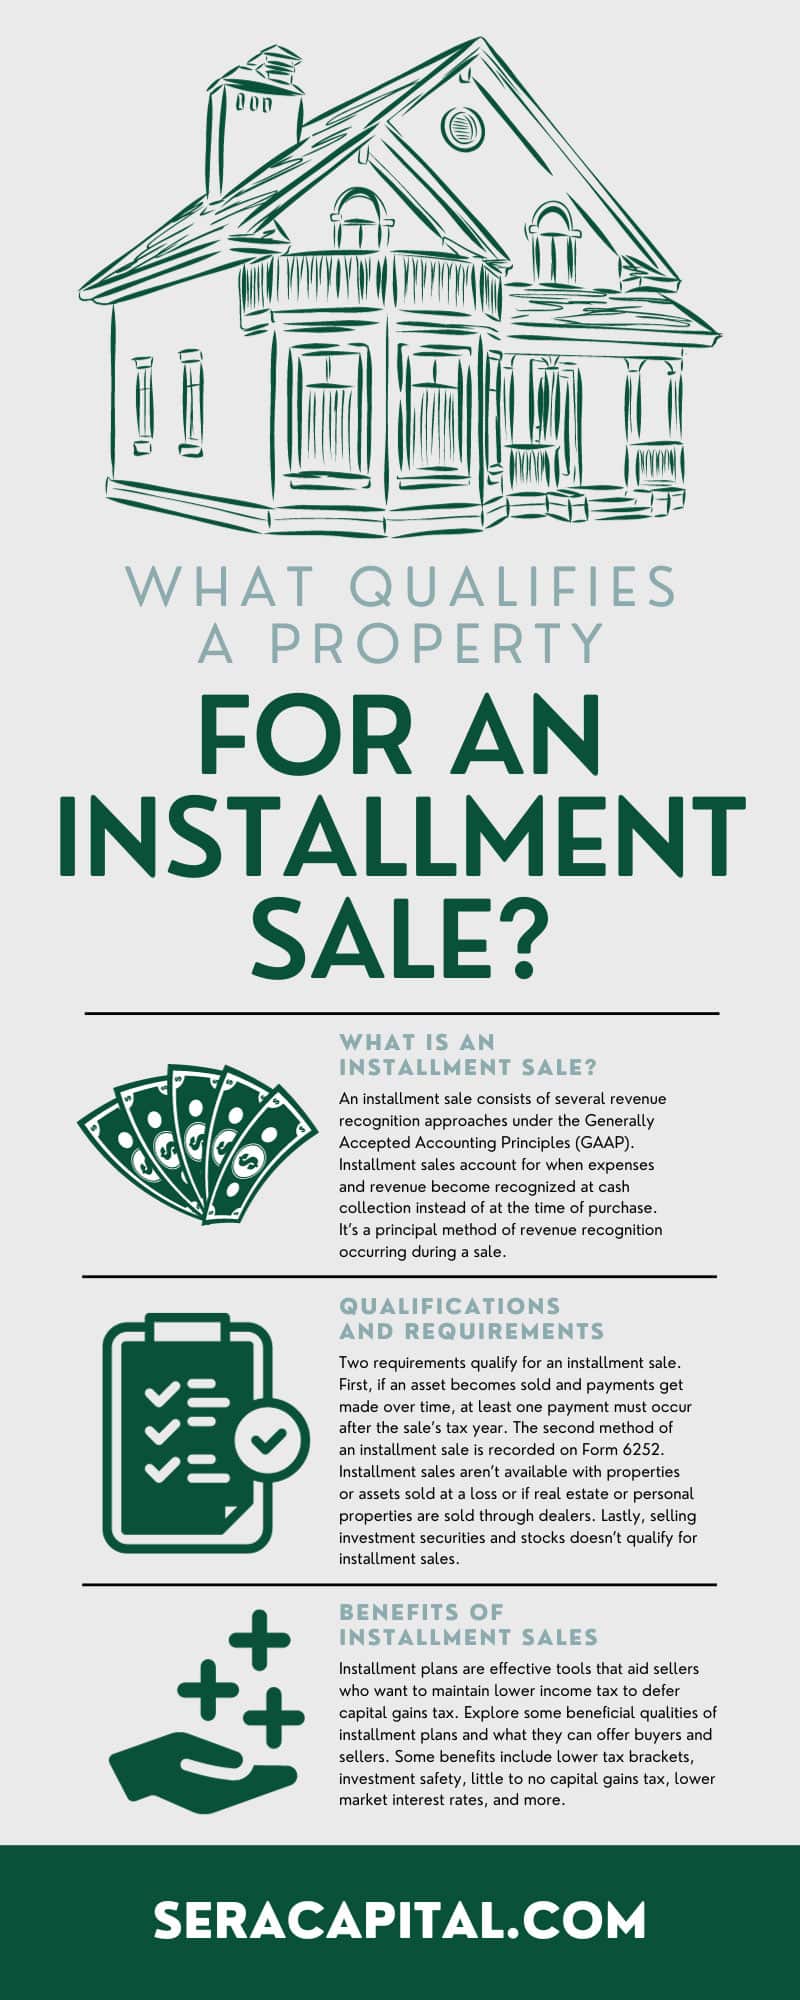 What Qualifies a Property for an Installment Sale?